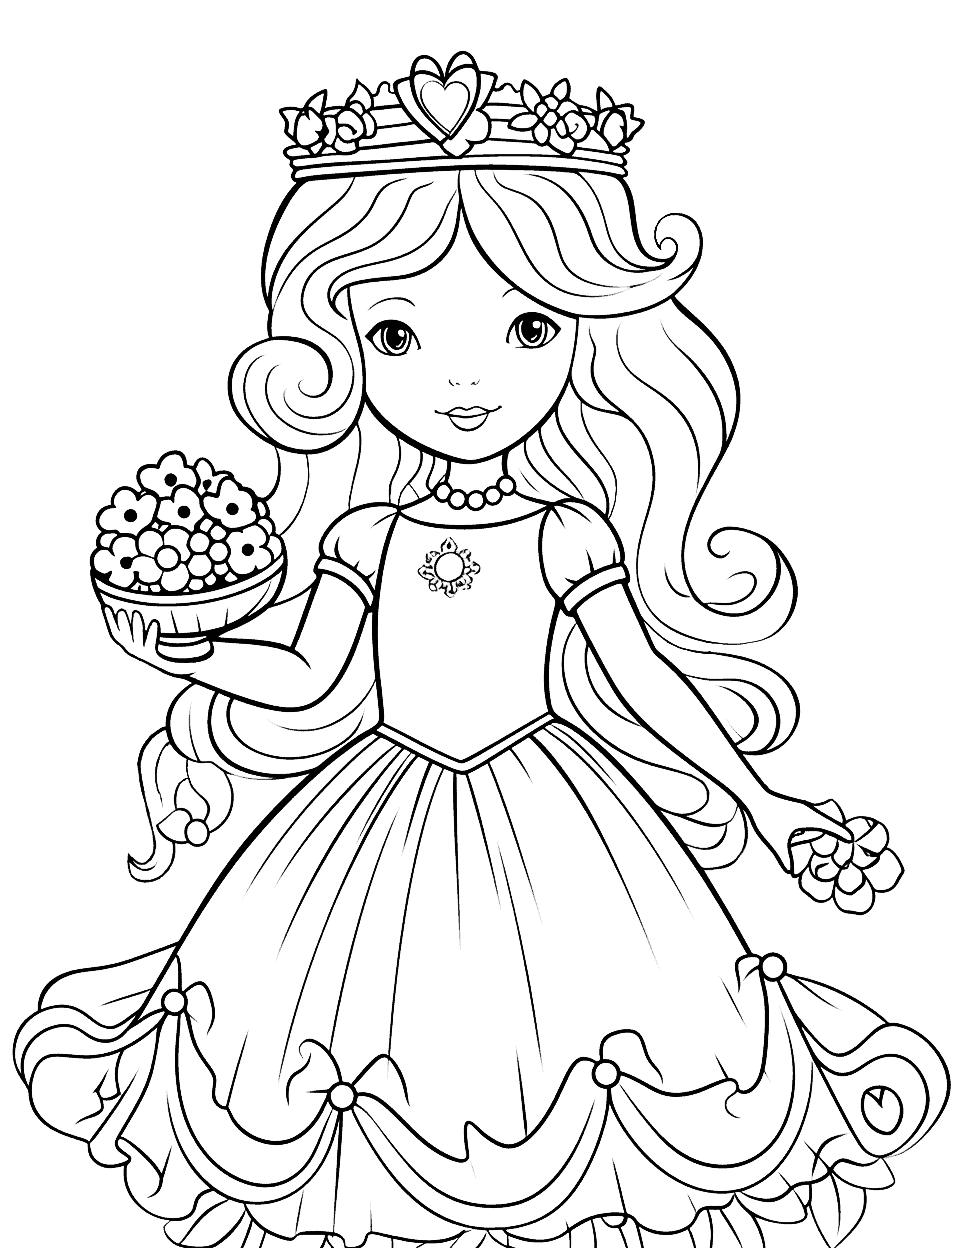 Detailed Princess Easter Coloring Page - A princess dressed in an elegant Easter outfit, surrounded by flowers and holding a basket of flowers.